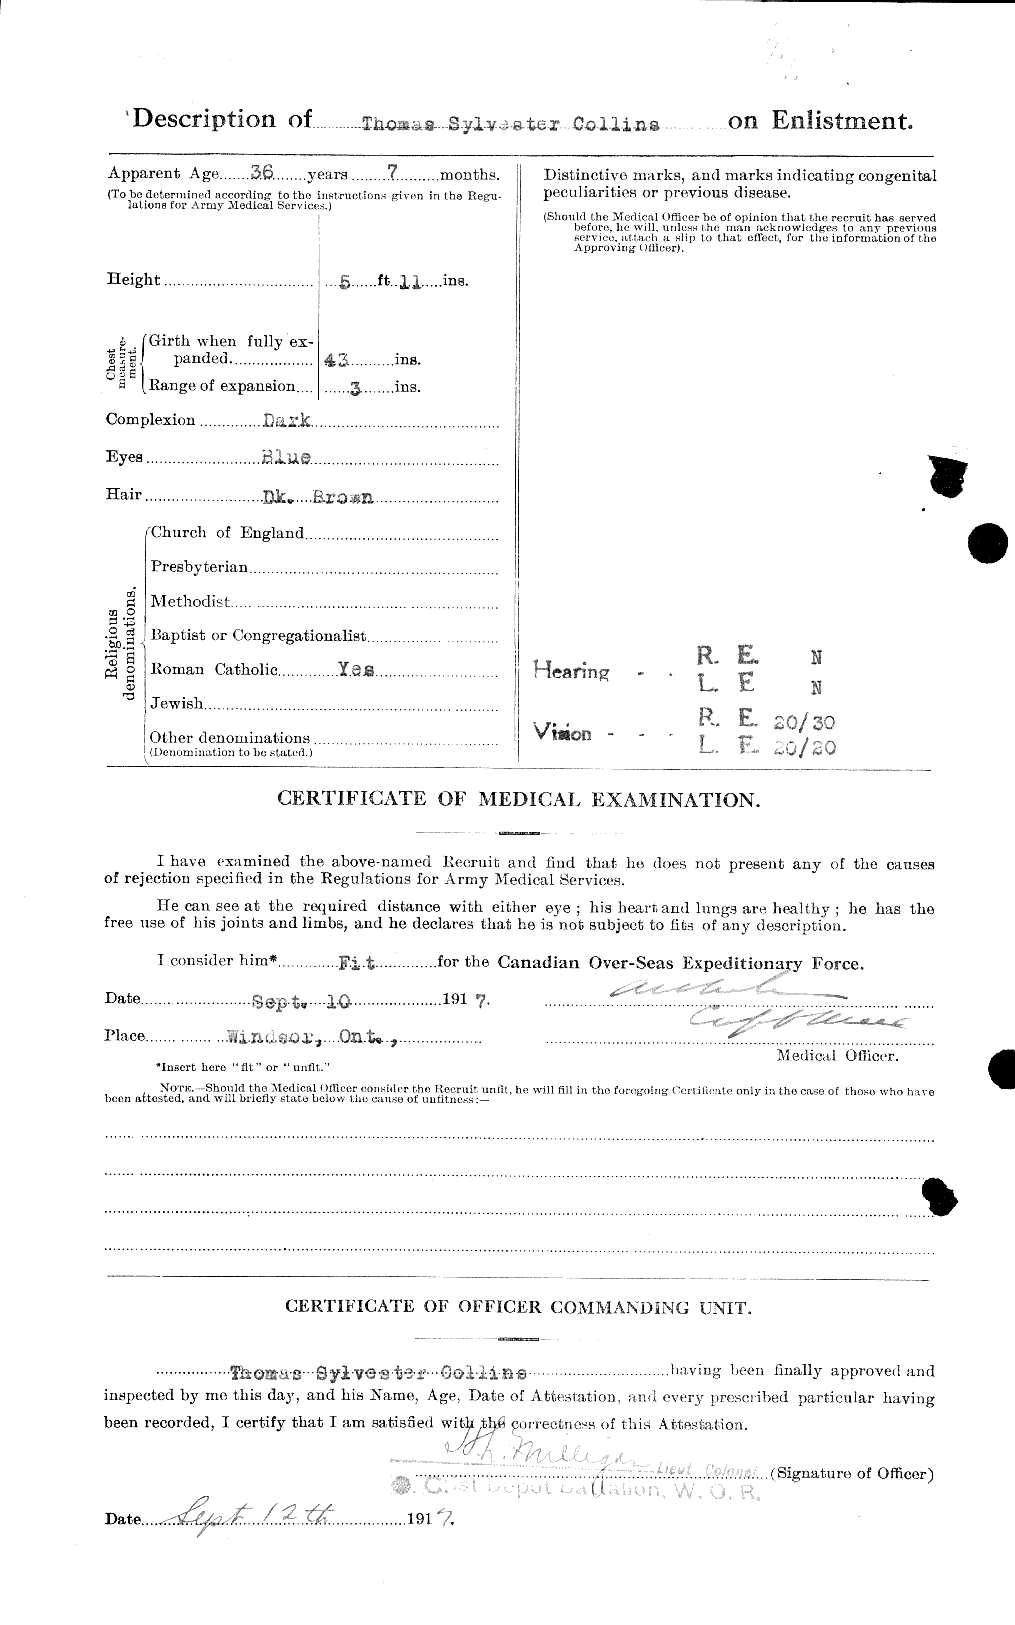 Personnel Records of the First World War - CEF 040673b